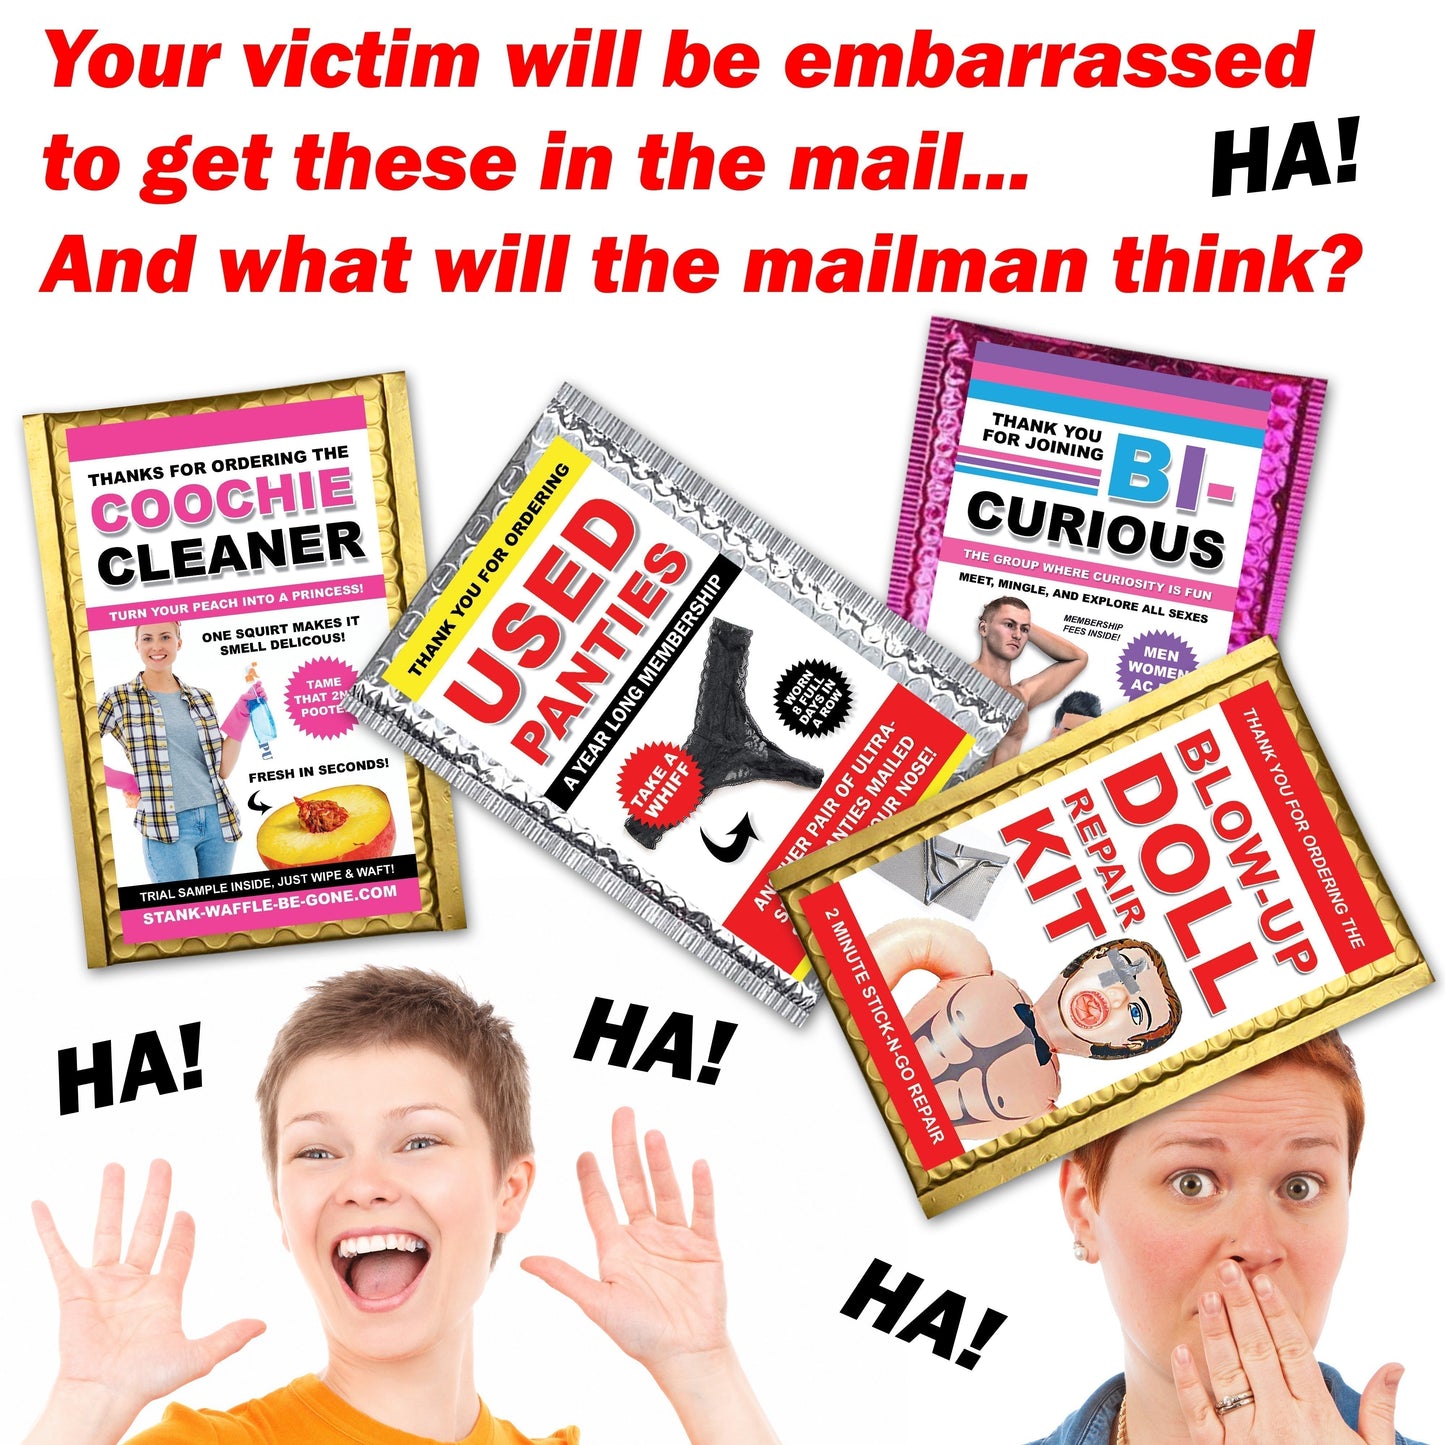 Sheep Lube embarrassing prank envelope gets mailed directly to your victims 100% anonymously!